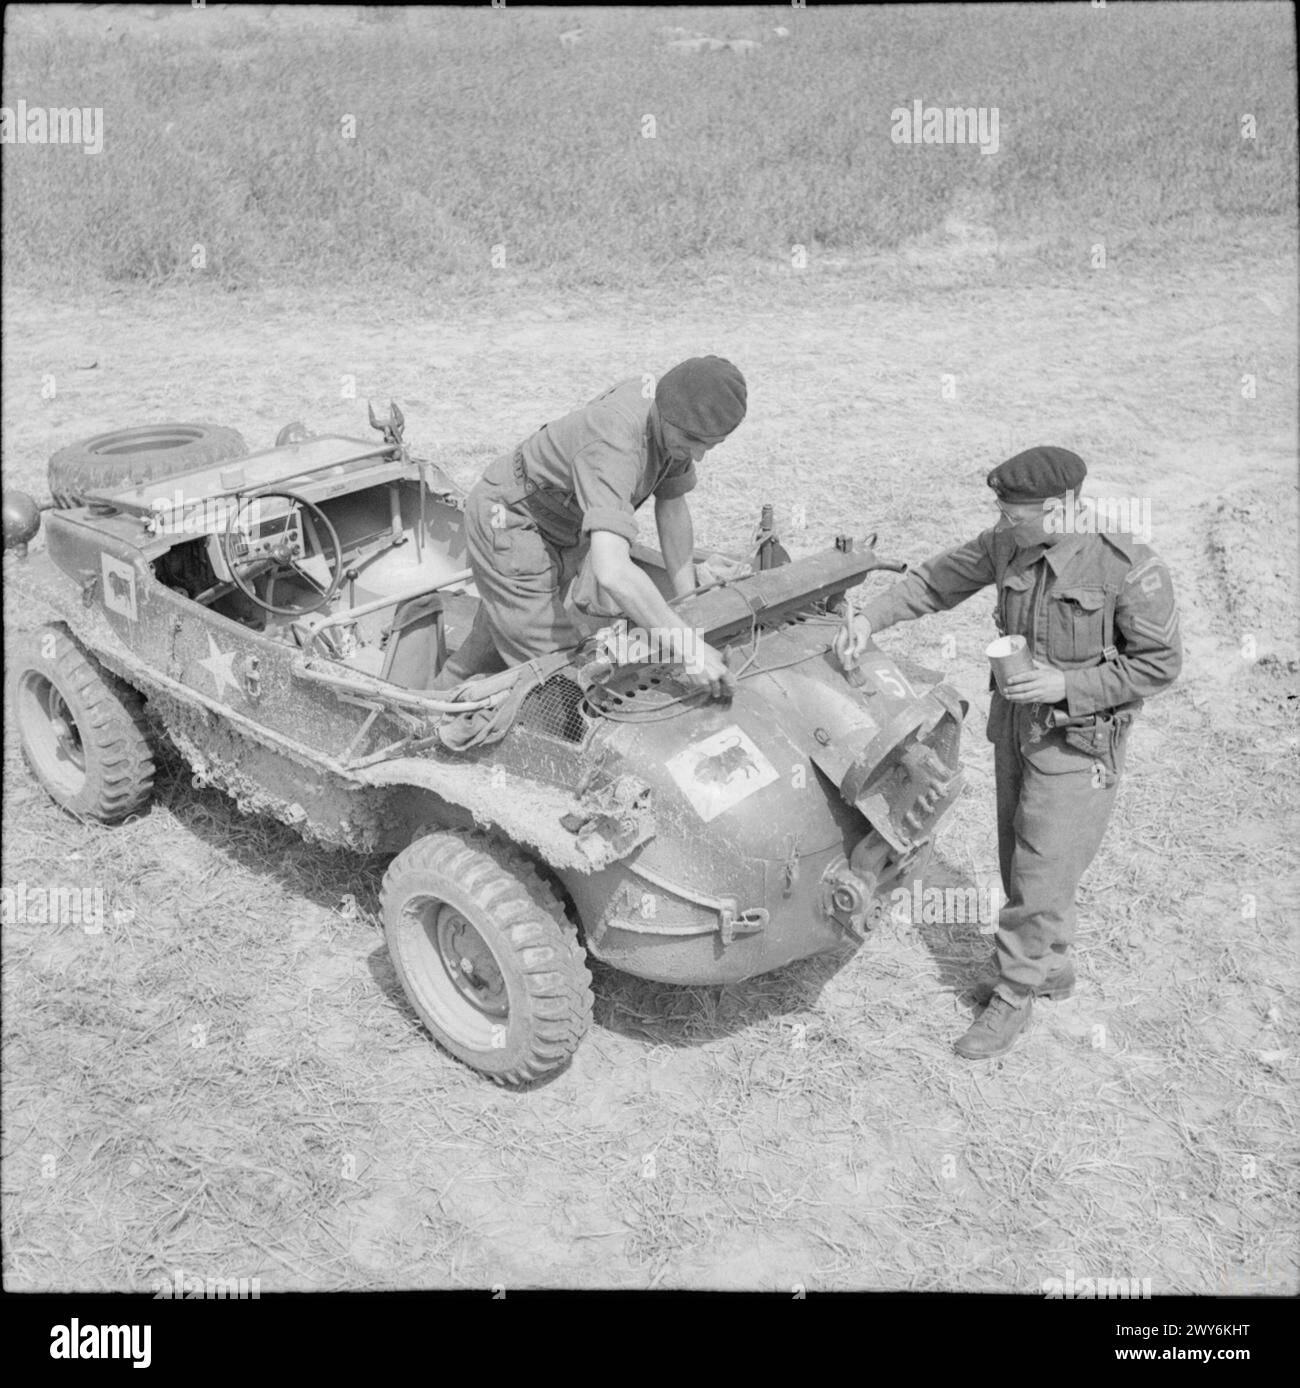 THE BRITISH ARMY IN NORMANDY 1944 - Men of 23rd Hussars, 11th Armoured Division, painting divisional and arm of service markings on a German Schwimmwagen captured from 12th SS Panzer Division (HitlerJugend), 6 July 1944. , British Army, 21st Hussars, British Army, 11th Armoured Division Stock Photo